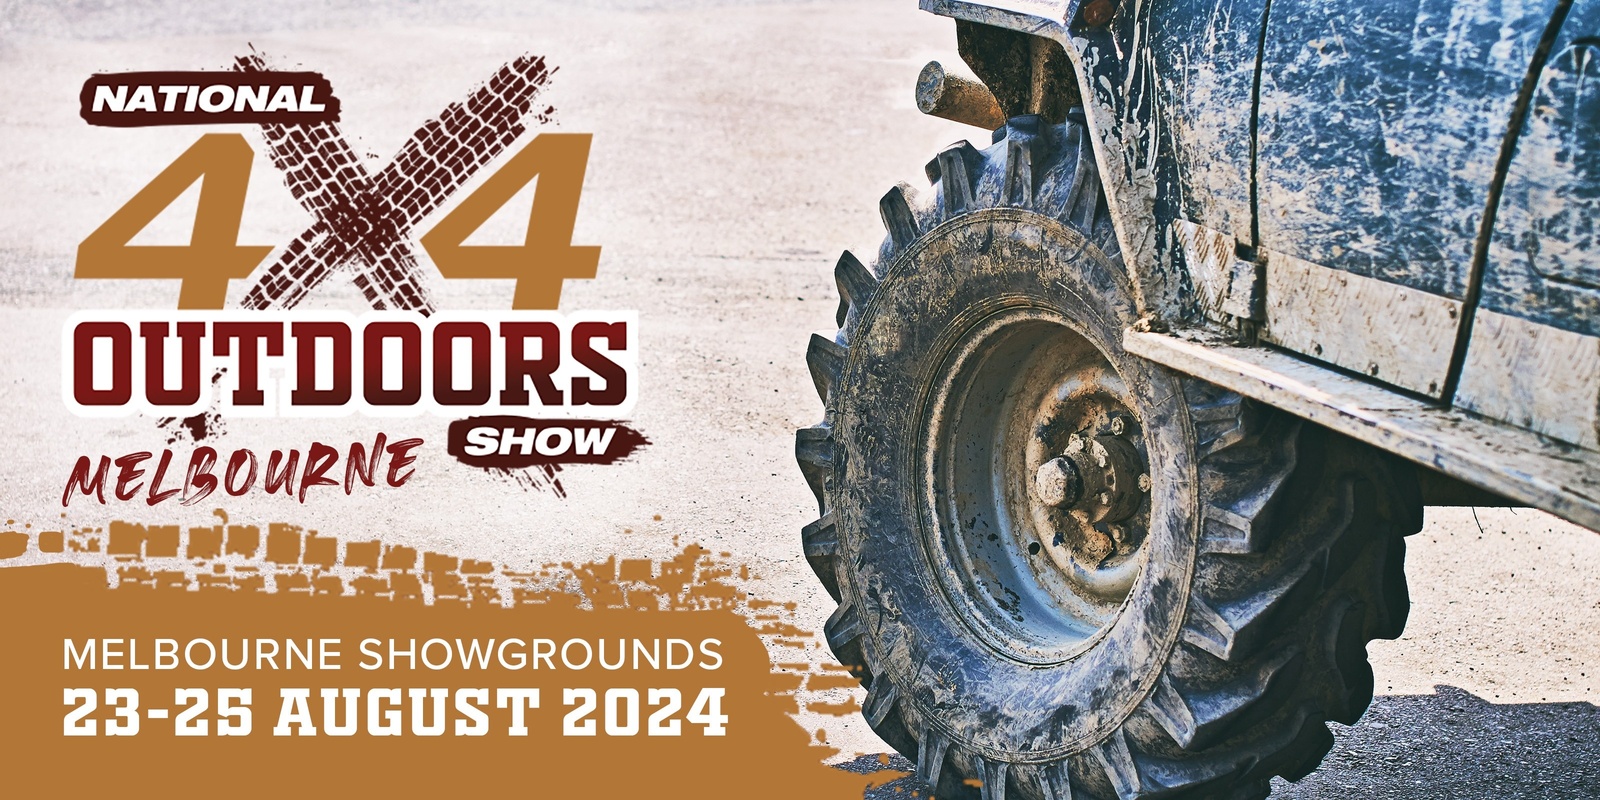 Banner image for National 4x4 Outdoors Show Melbourne 2024